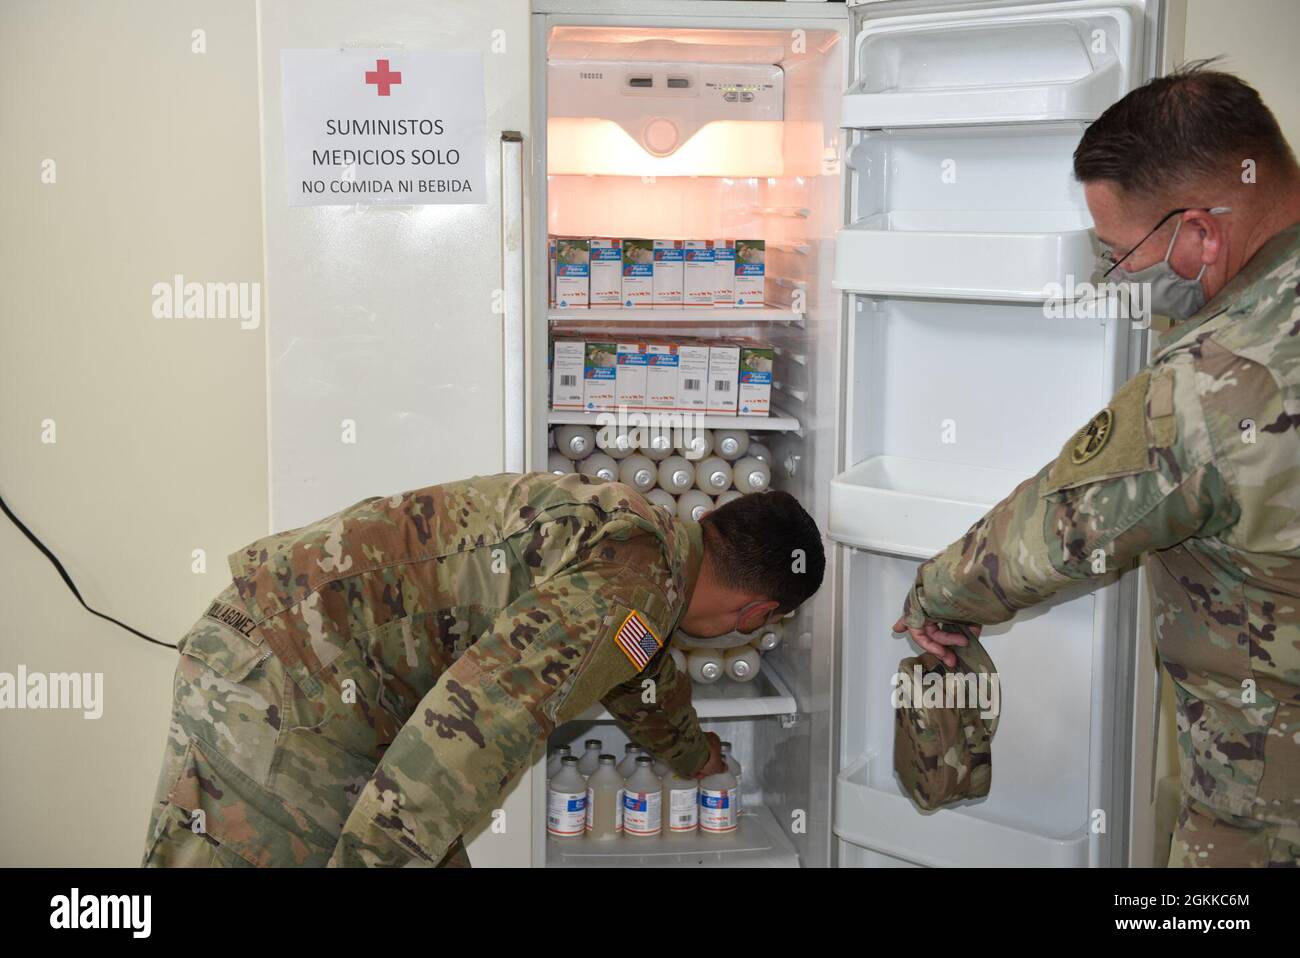 U.S. Army Capt. Johnny Villagomez, left, an engineer assigned to Joint Task Force-Bravo (JTF-B), Soto Cano Air Base, Honduras, and Sgt. Maj. John Gray, right, operations senior enlisted leader with JTF-B, store vaccinations for cattle in La Union, El Salvador, May 14, 2021. As part of Resolute Sentinel, veterinary specialists immunized cattle during a veterinary readiness training exercise in Tamarindo and El Jaguey, El Salvador. Stock Photo